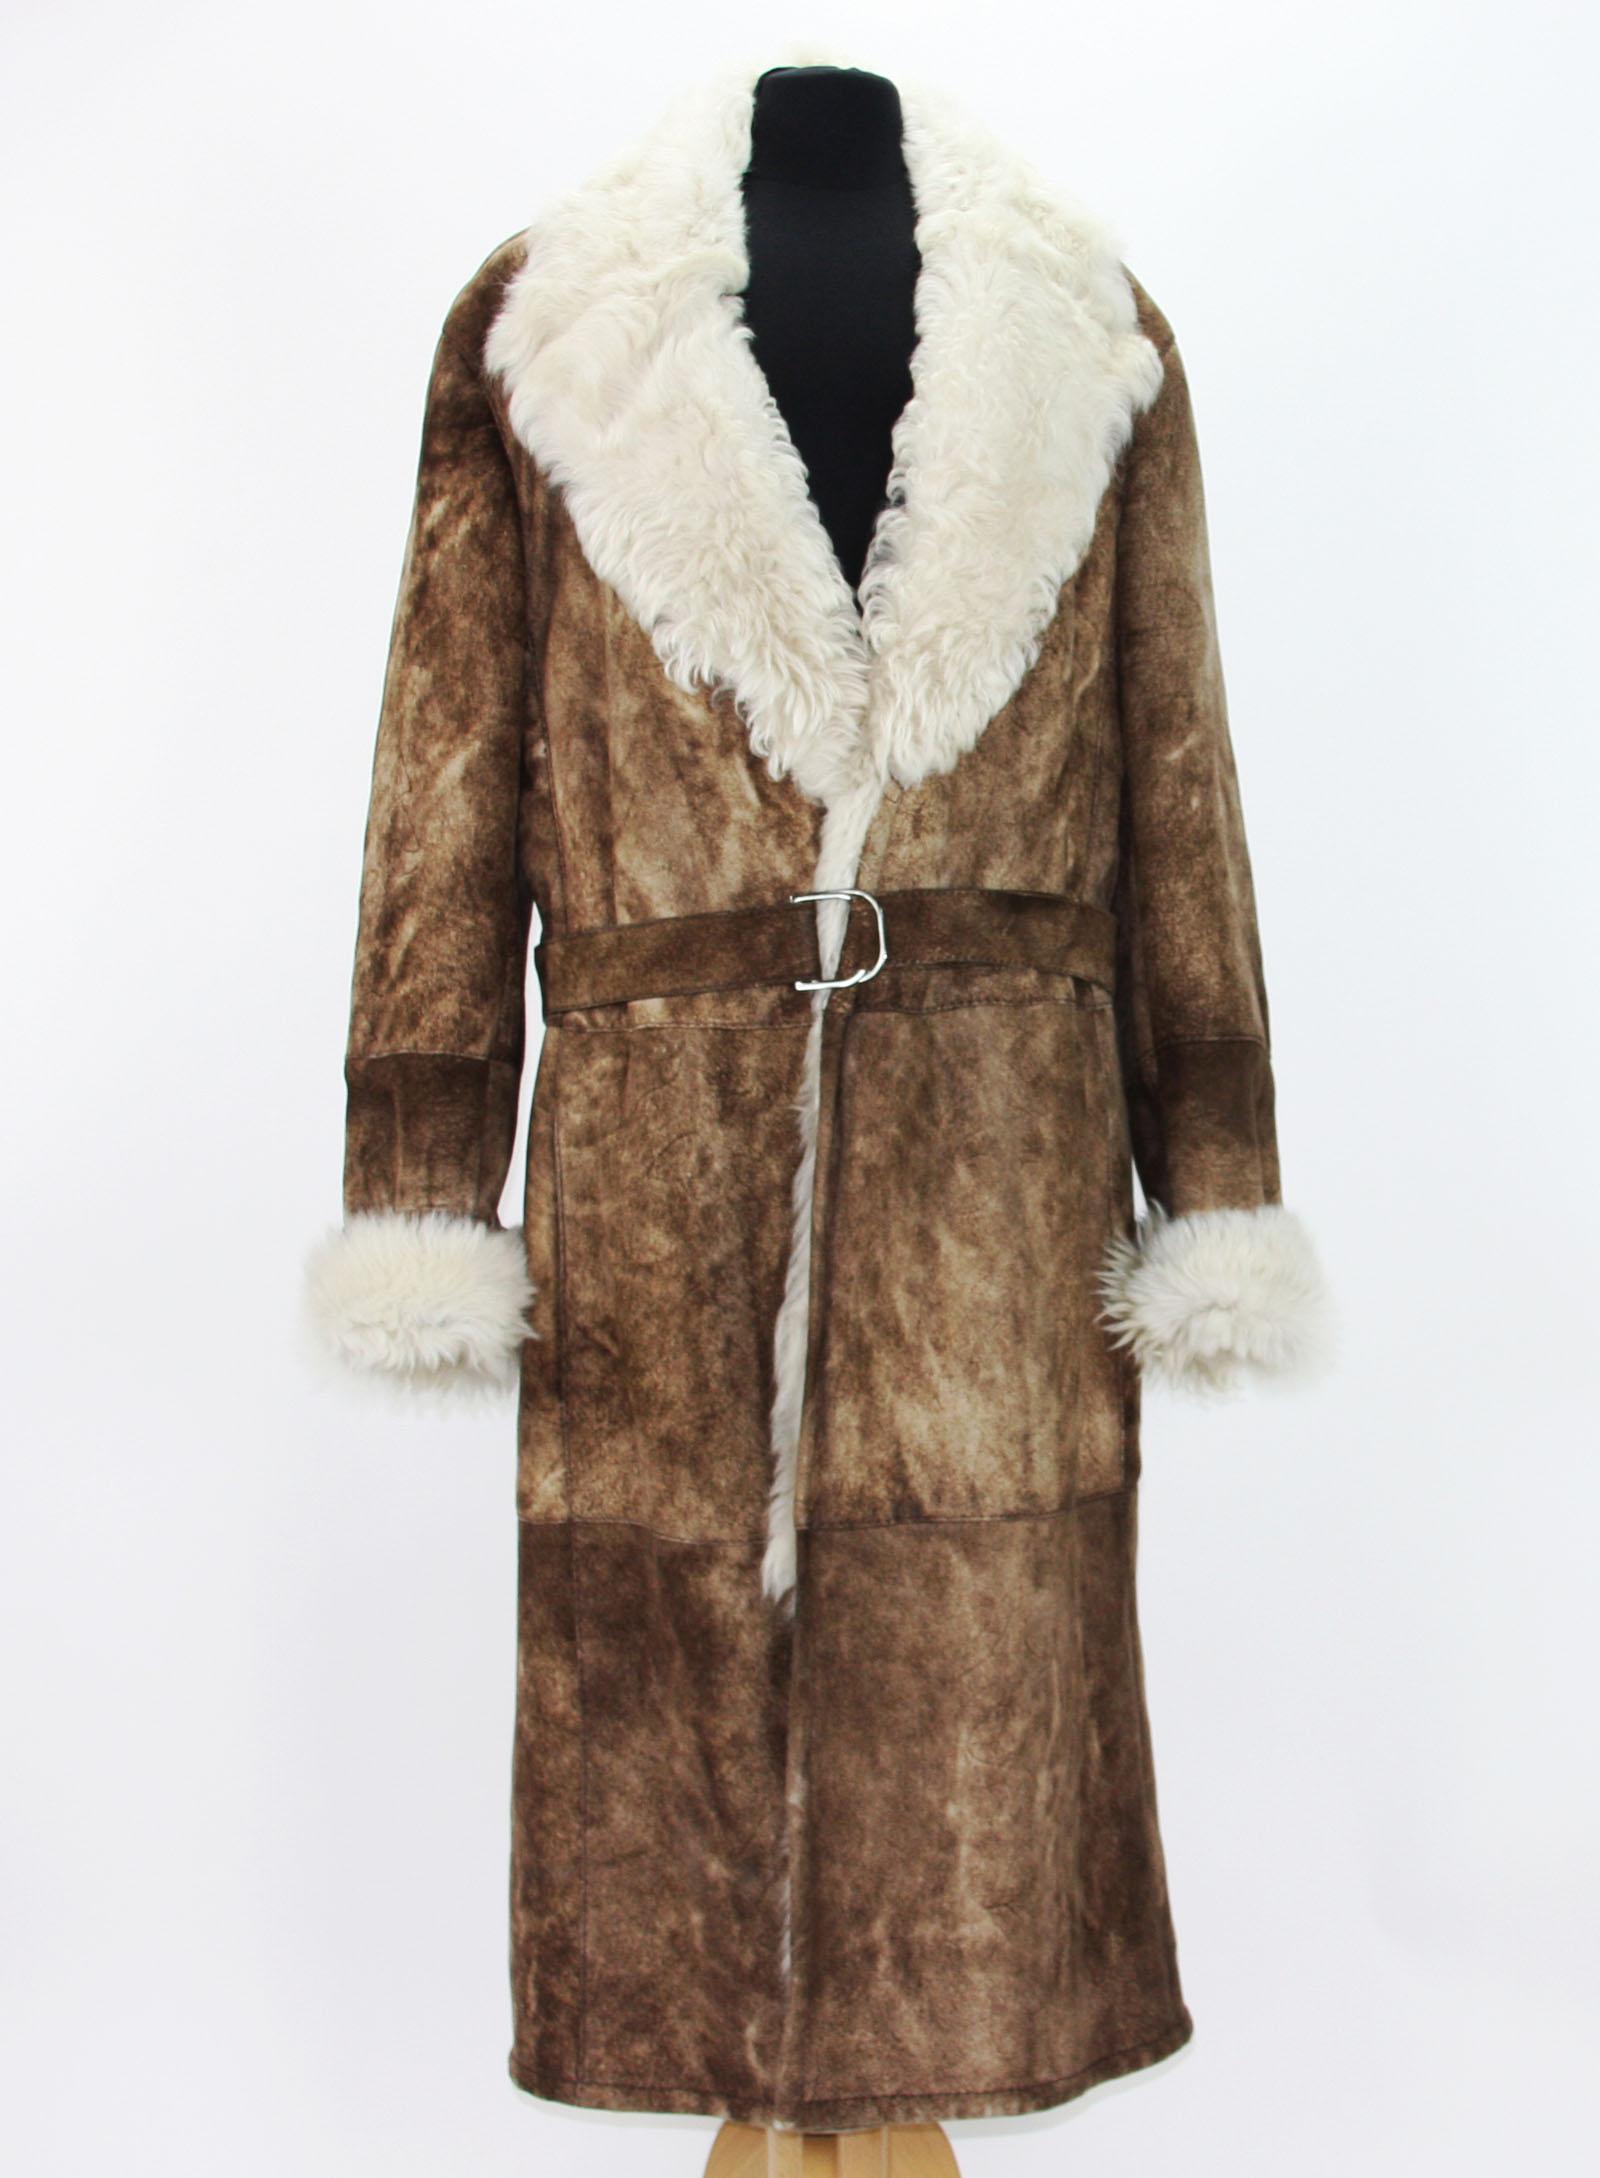 New Tom Ford for Gucci Men's Brown Shearling Suede Long Coat
Italian size 54 - US 44
100% Real Shearling, Slit Deep Pockets at Sides, Detachable D-ring Belt at Waist, Hidden Button Closure at Front, Single Vent at Back.
Measurements: Length - 48